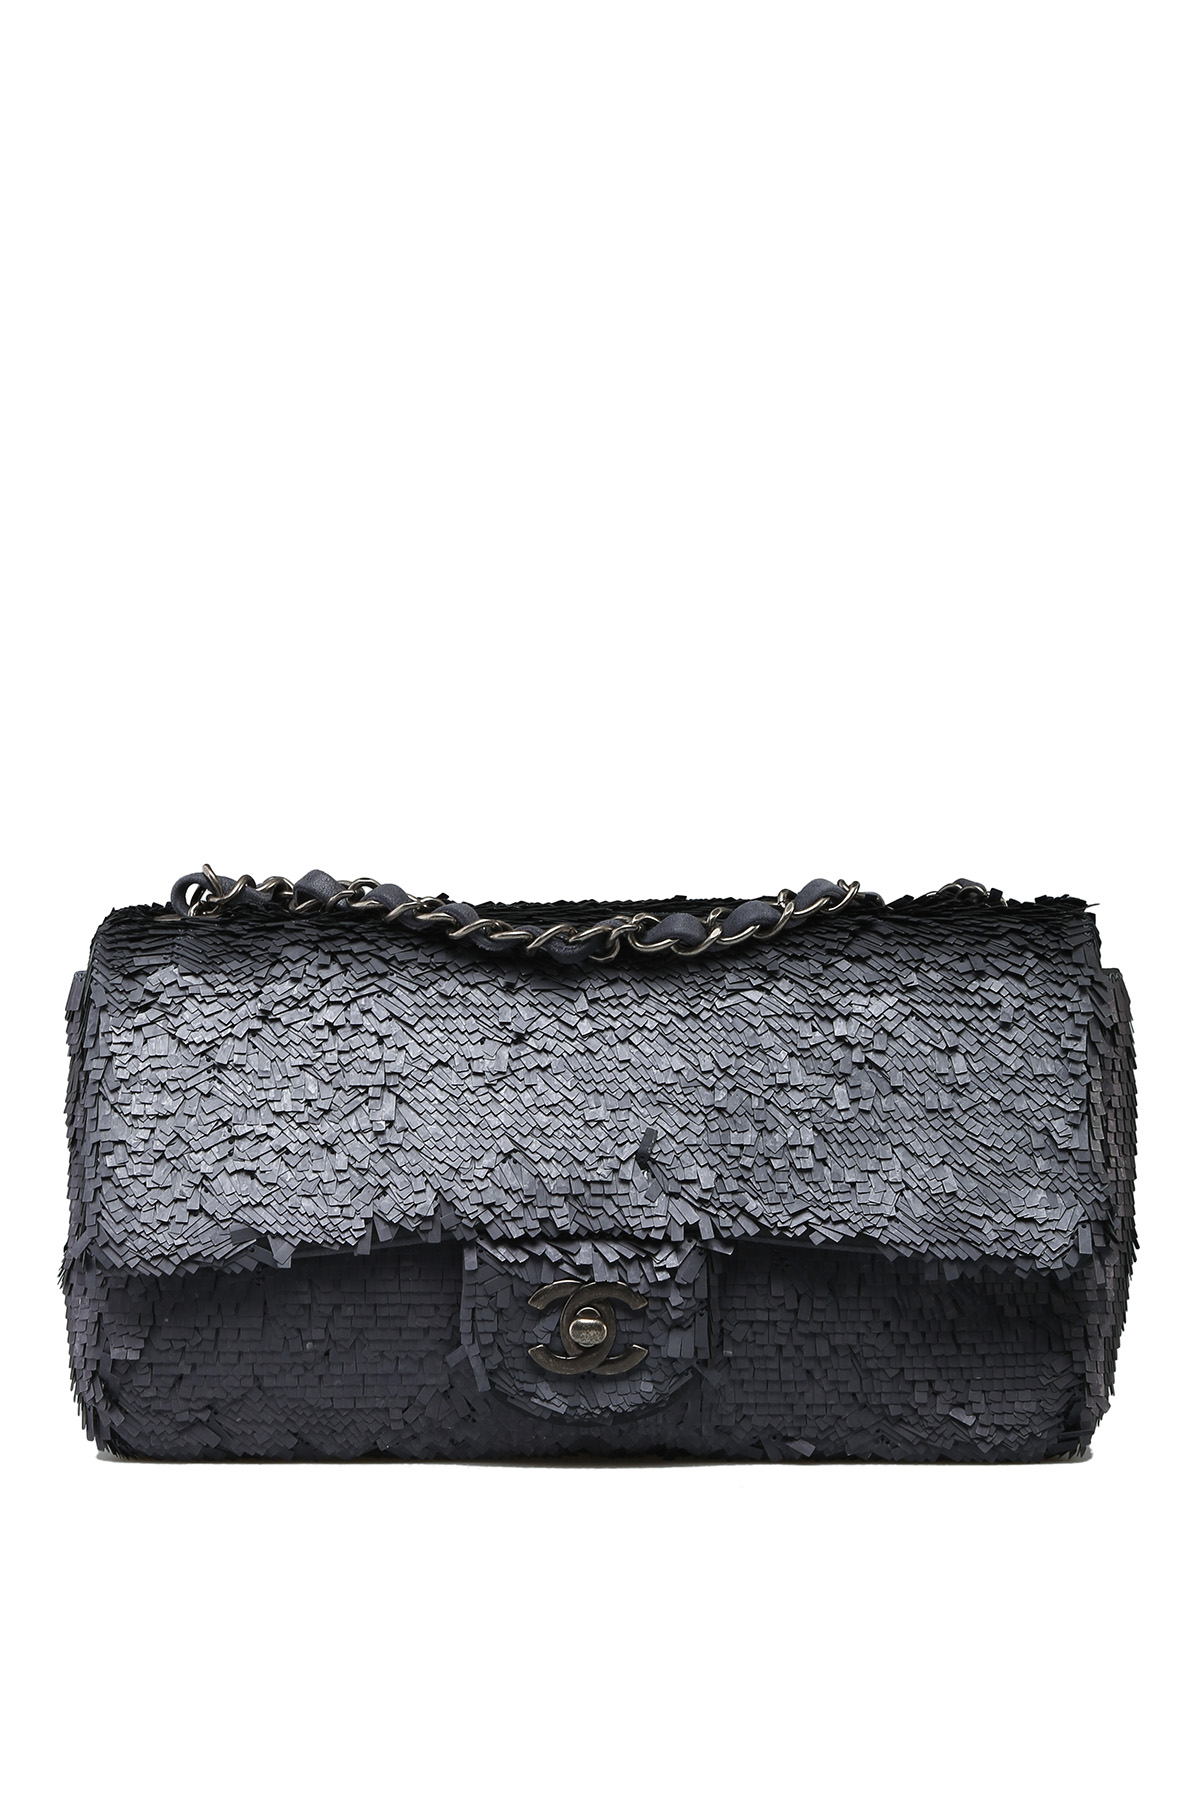 Chanel Medium Single Flap Bag in Black & Dark Grey Embroidered Sequins &  Calfskin with Silver-Tone Metal Hardware